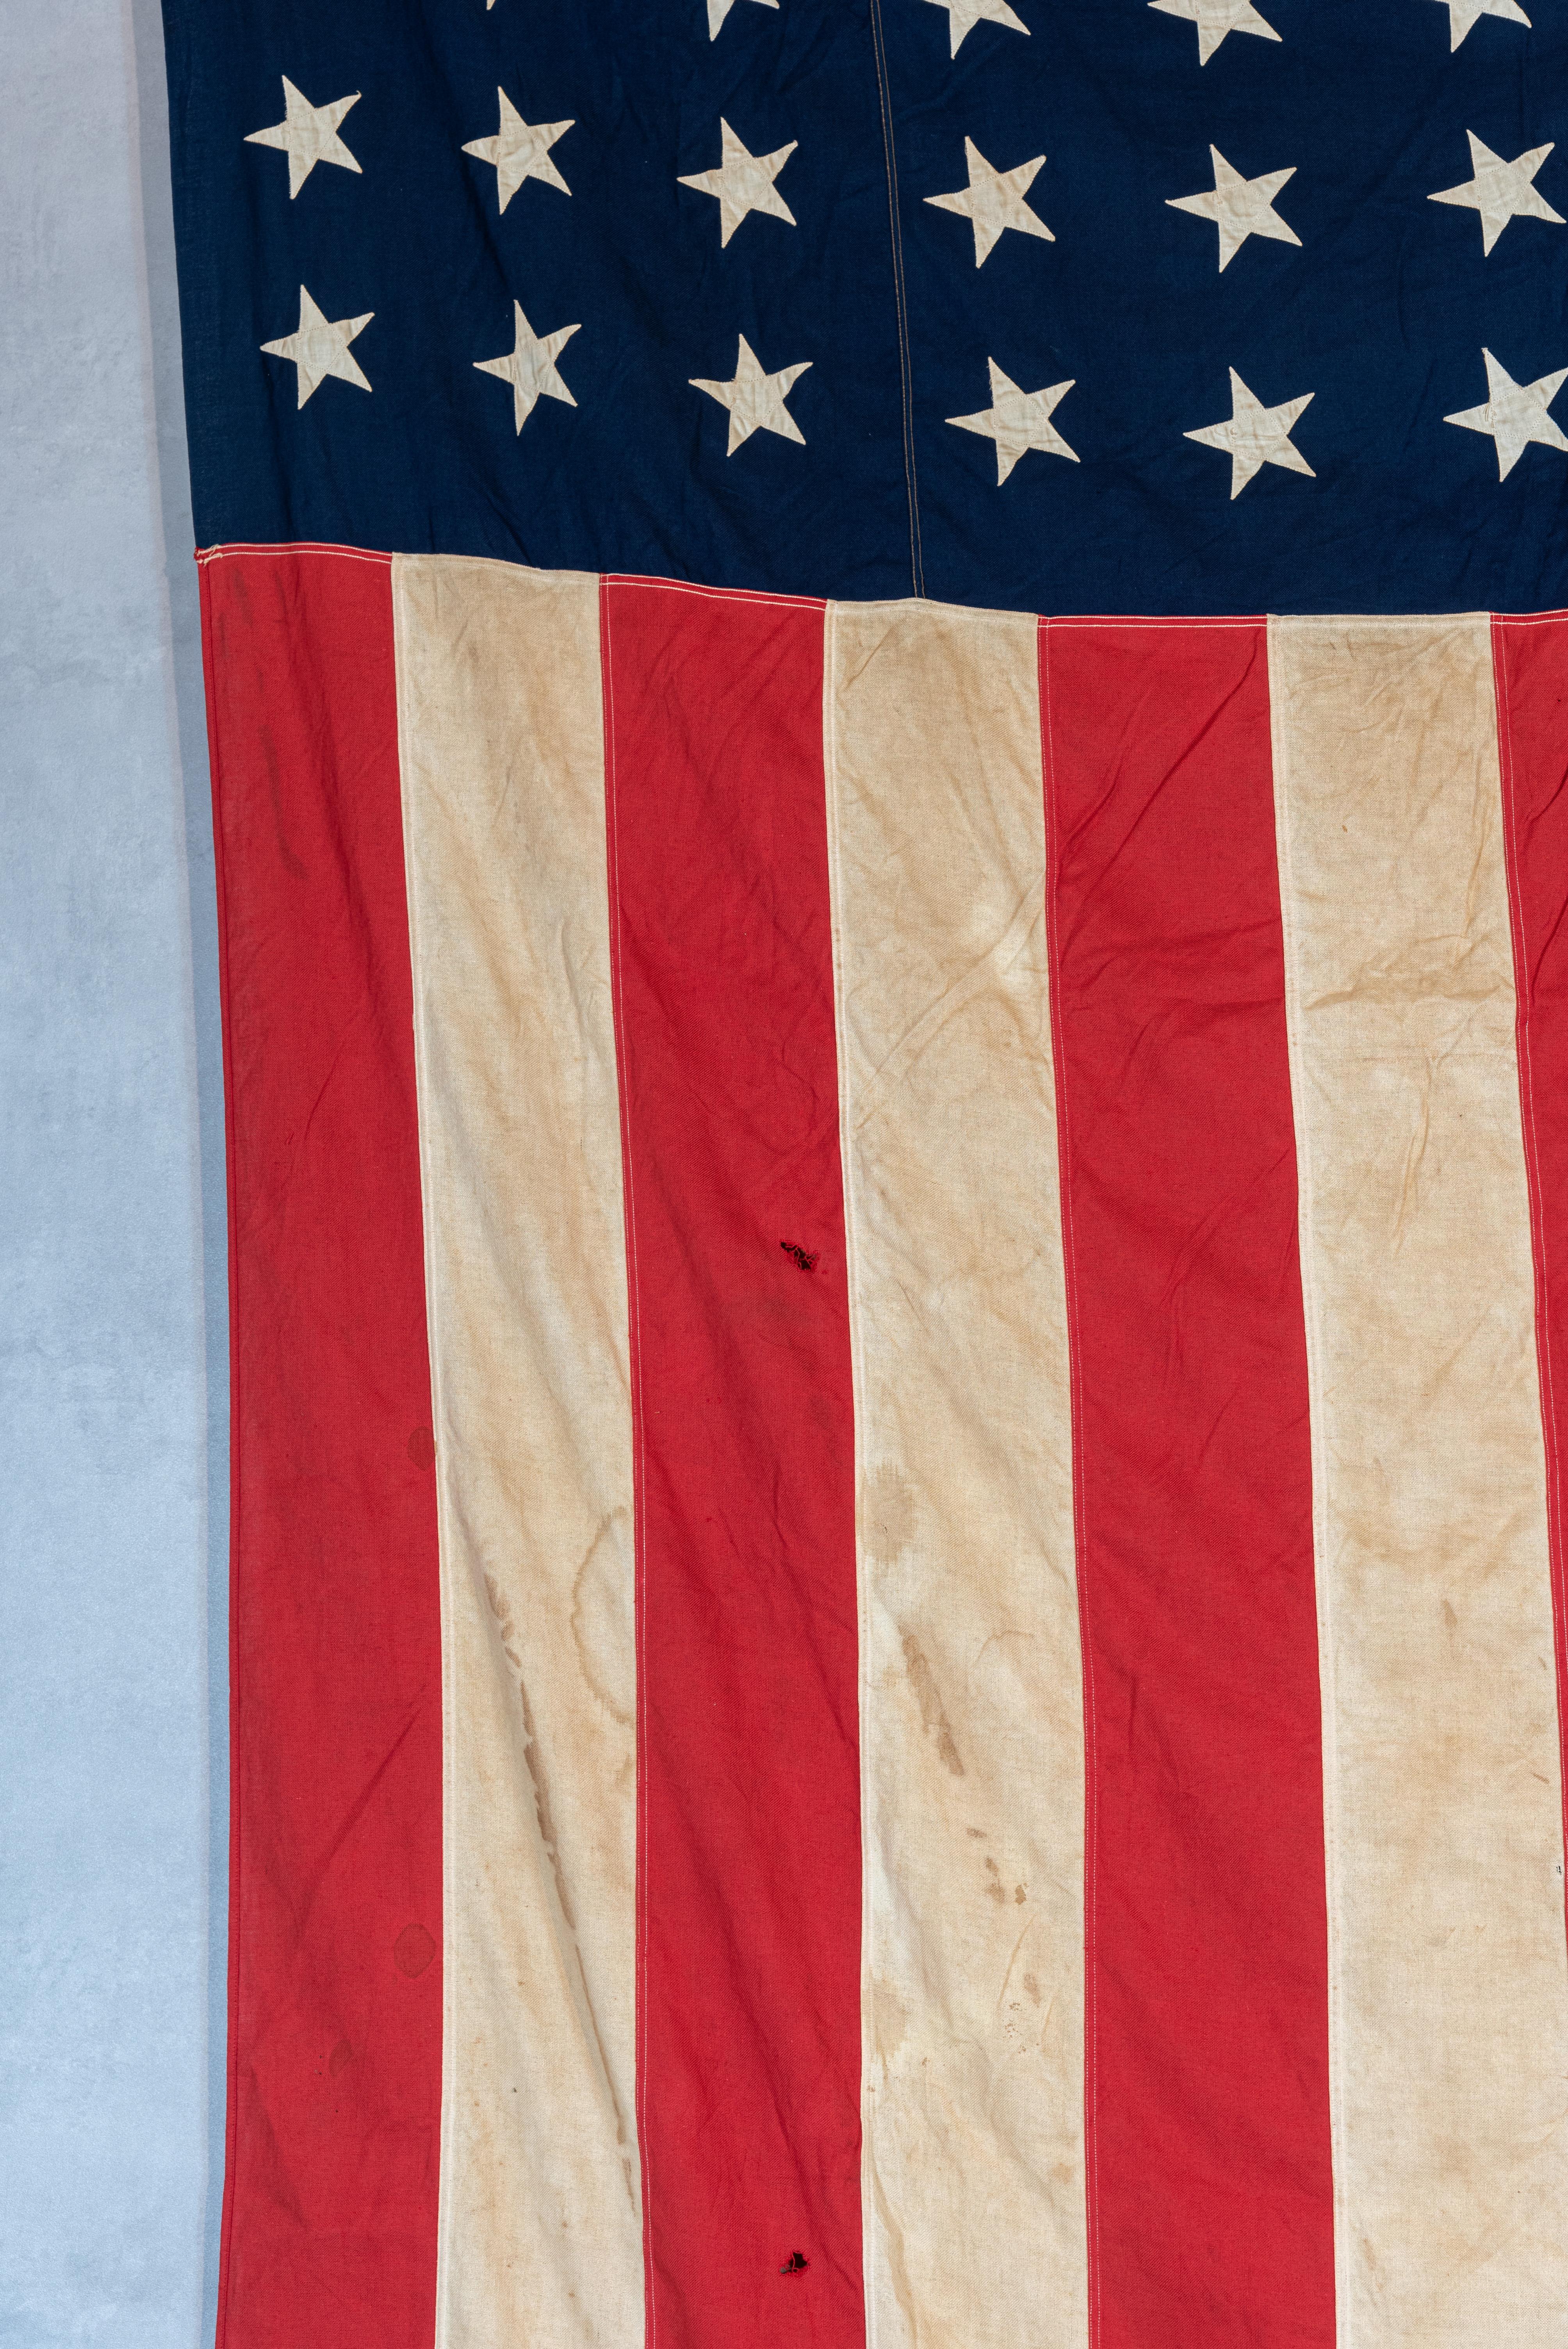 Step back in time and immerse yourself in the history of World War II with this remarkable and very large American flag made by Defiance. This flag, dating back to the WWII era, is believed to have been used in 1944, adding a sense of authenticity